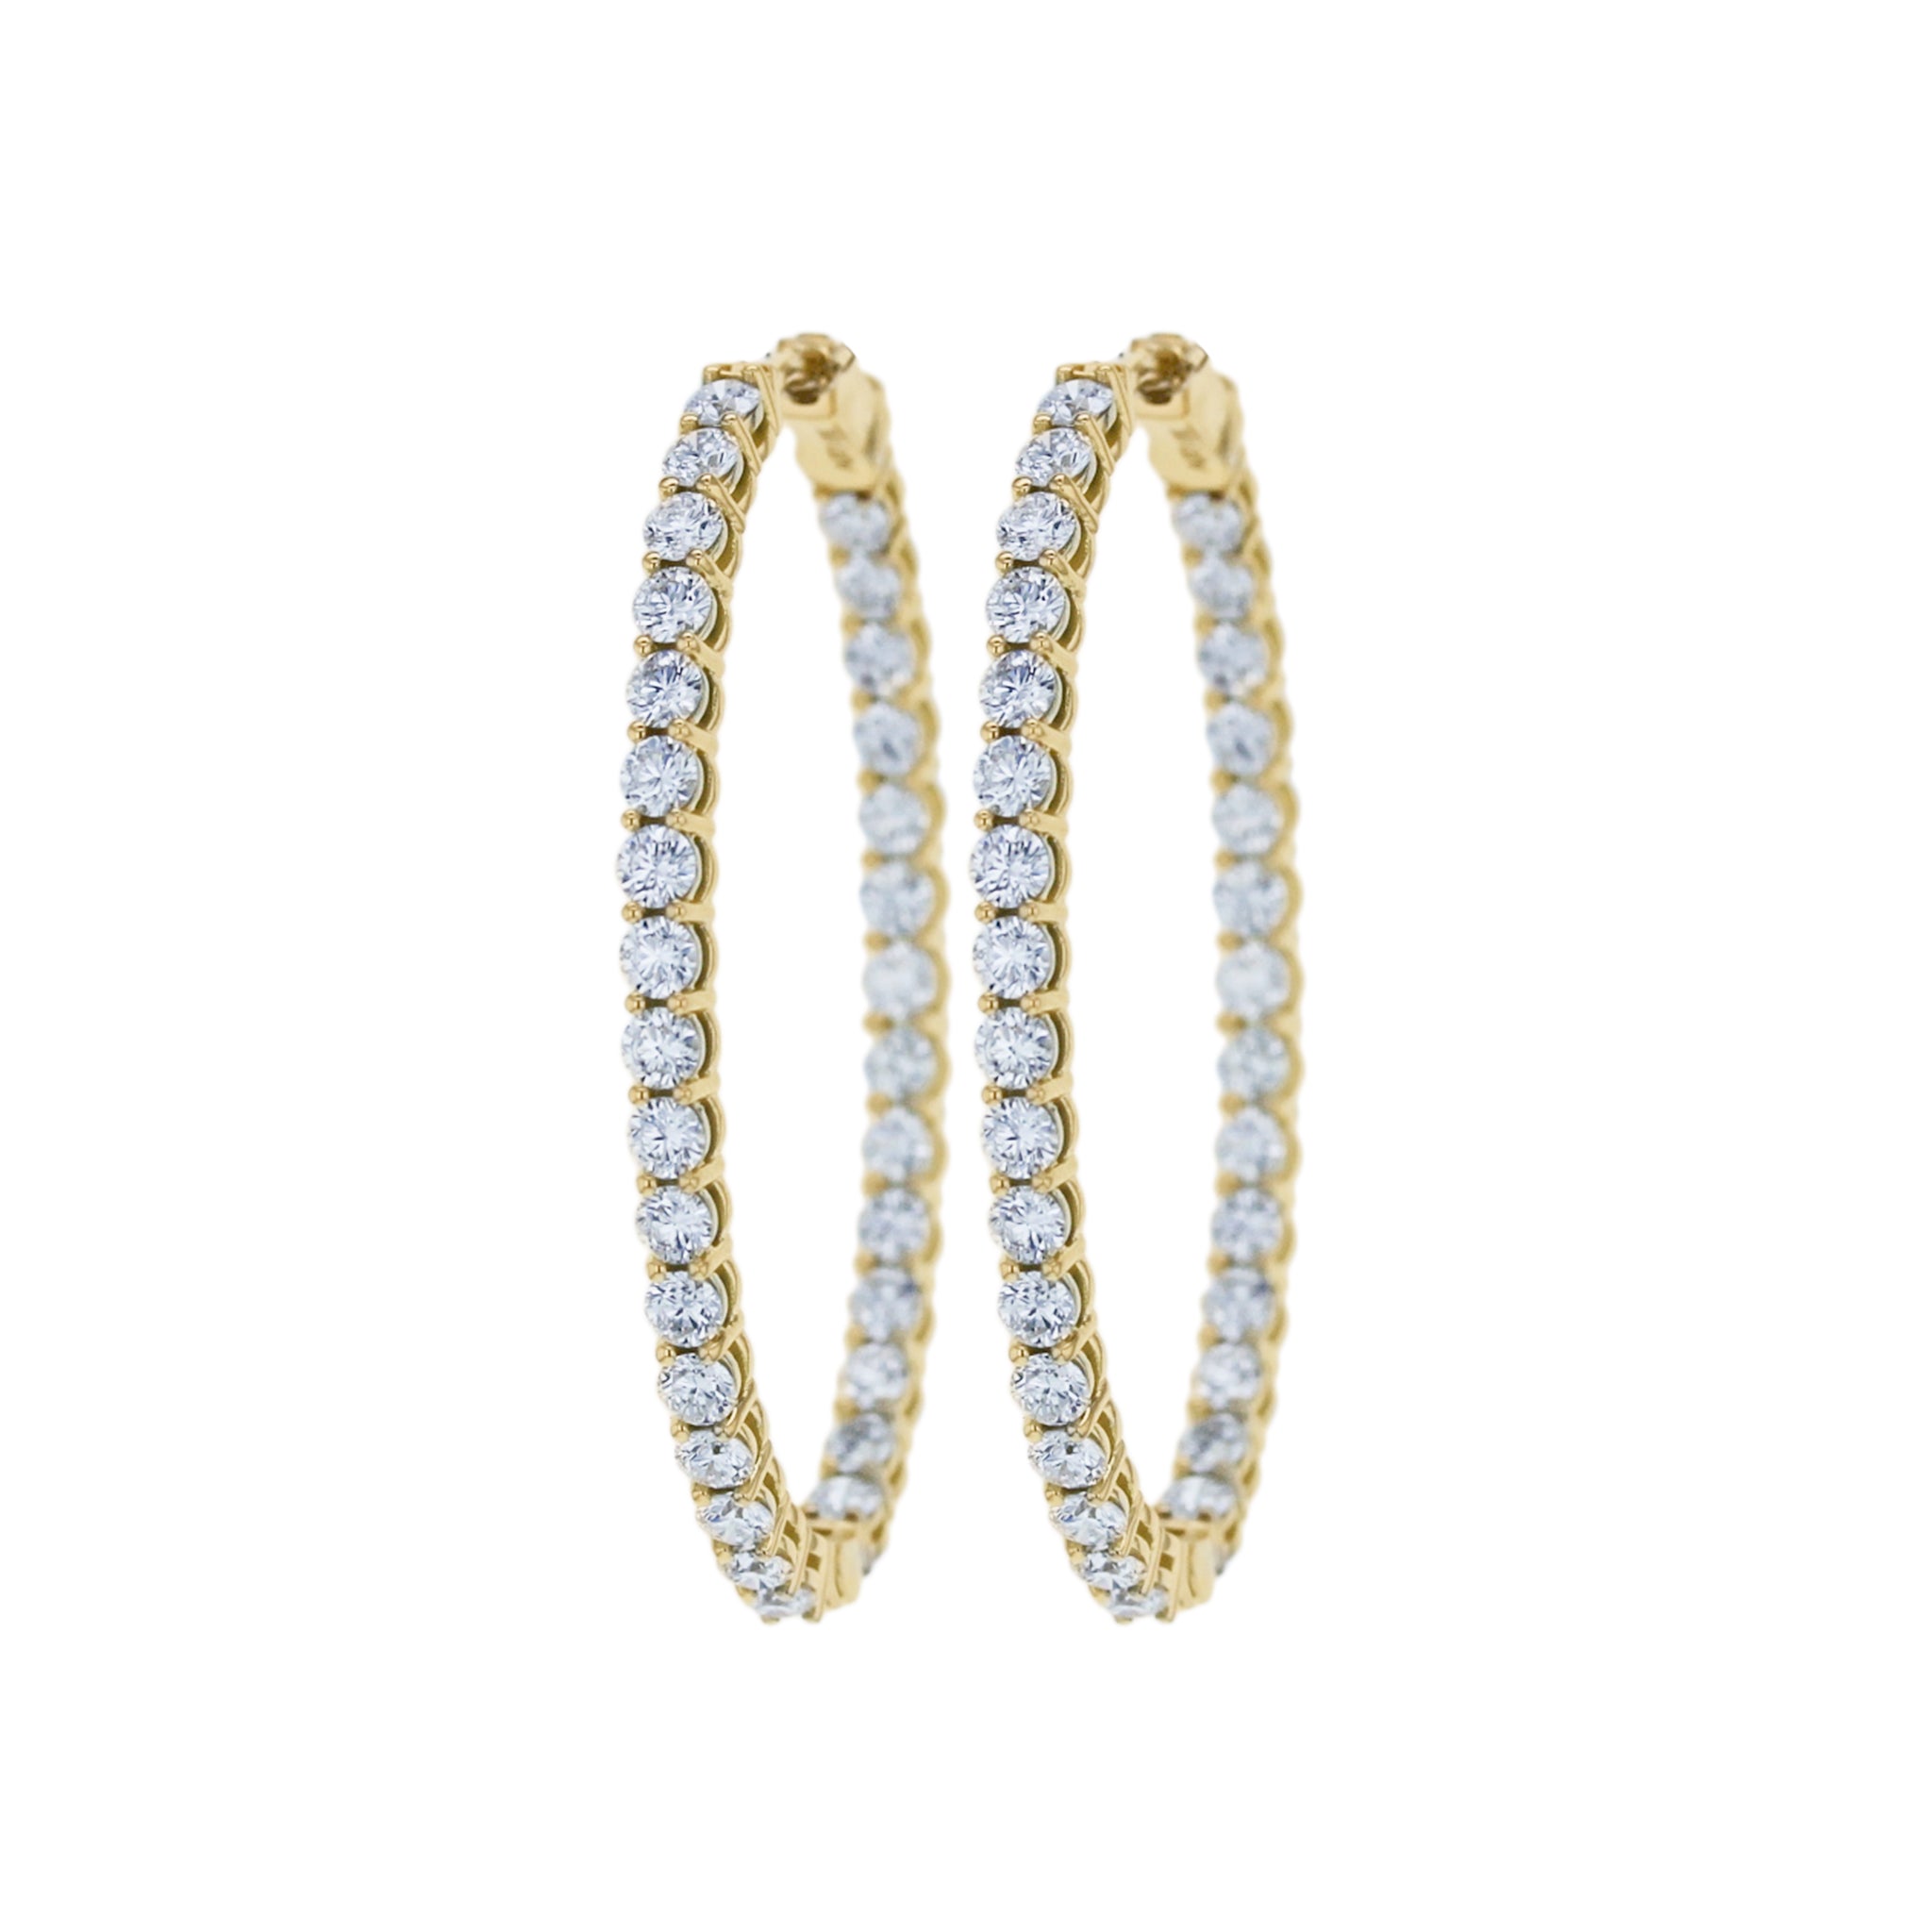 American Jewelry Designs Oval Diamond Hoops - Be On Park